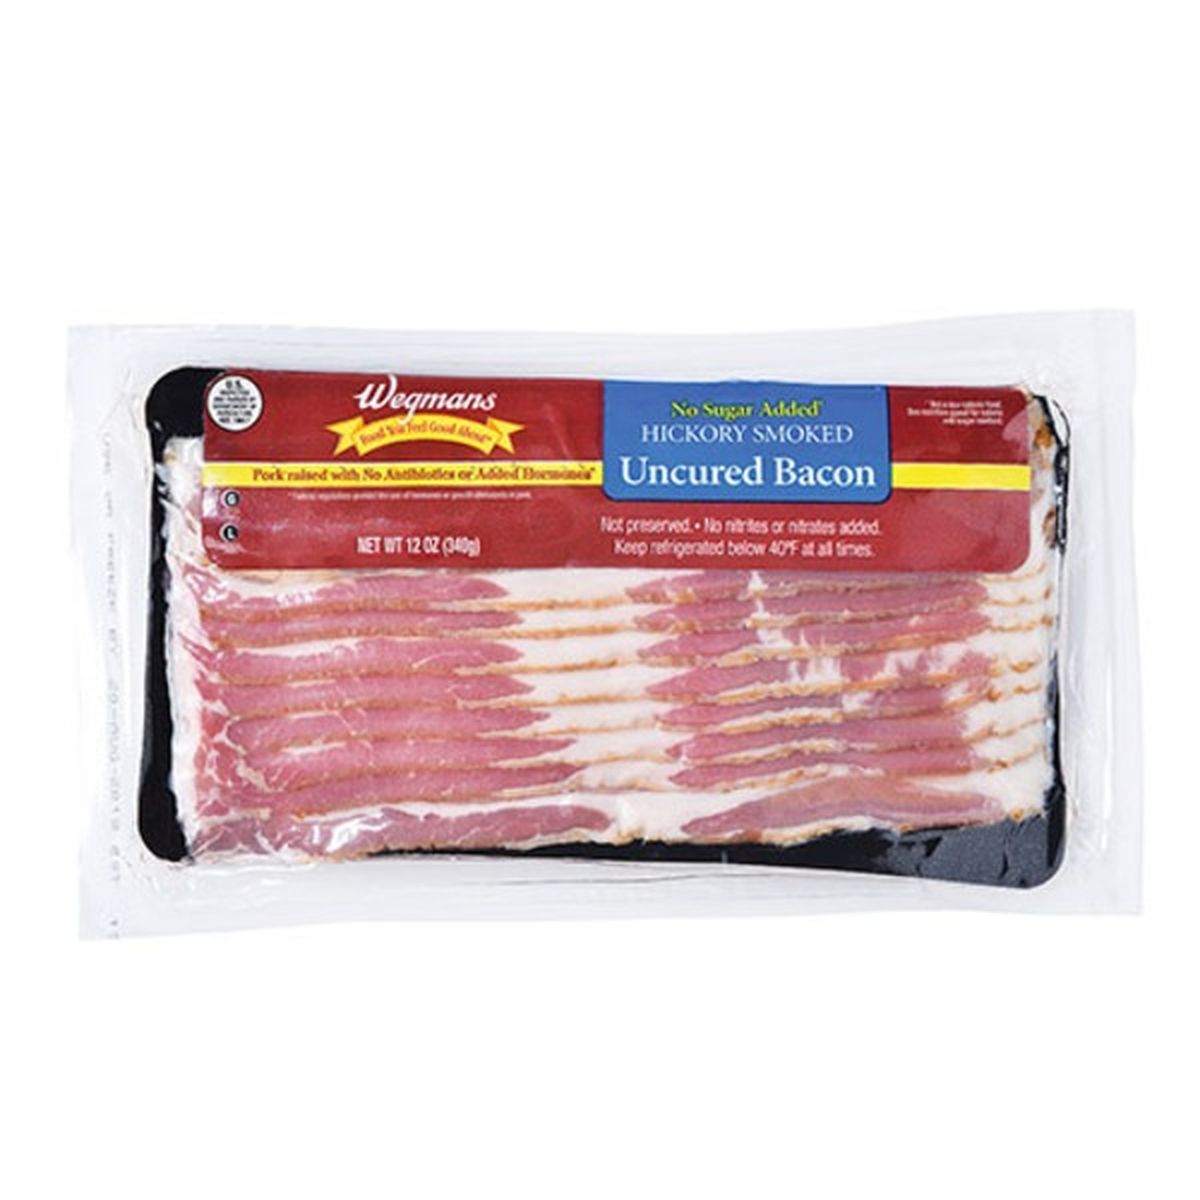 Calories in Wegmans No Sugar Added Hickory Smoked Uncured Bacon